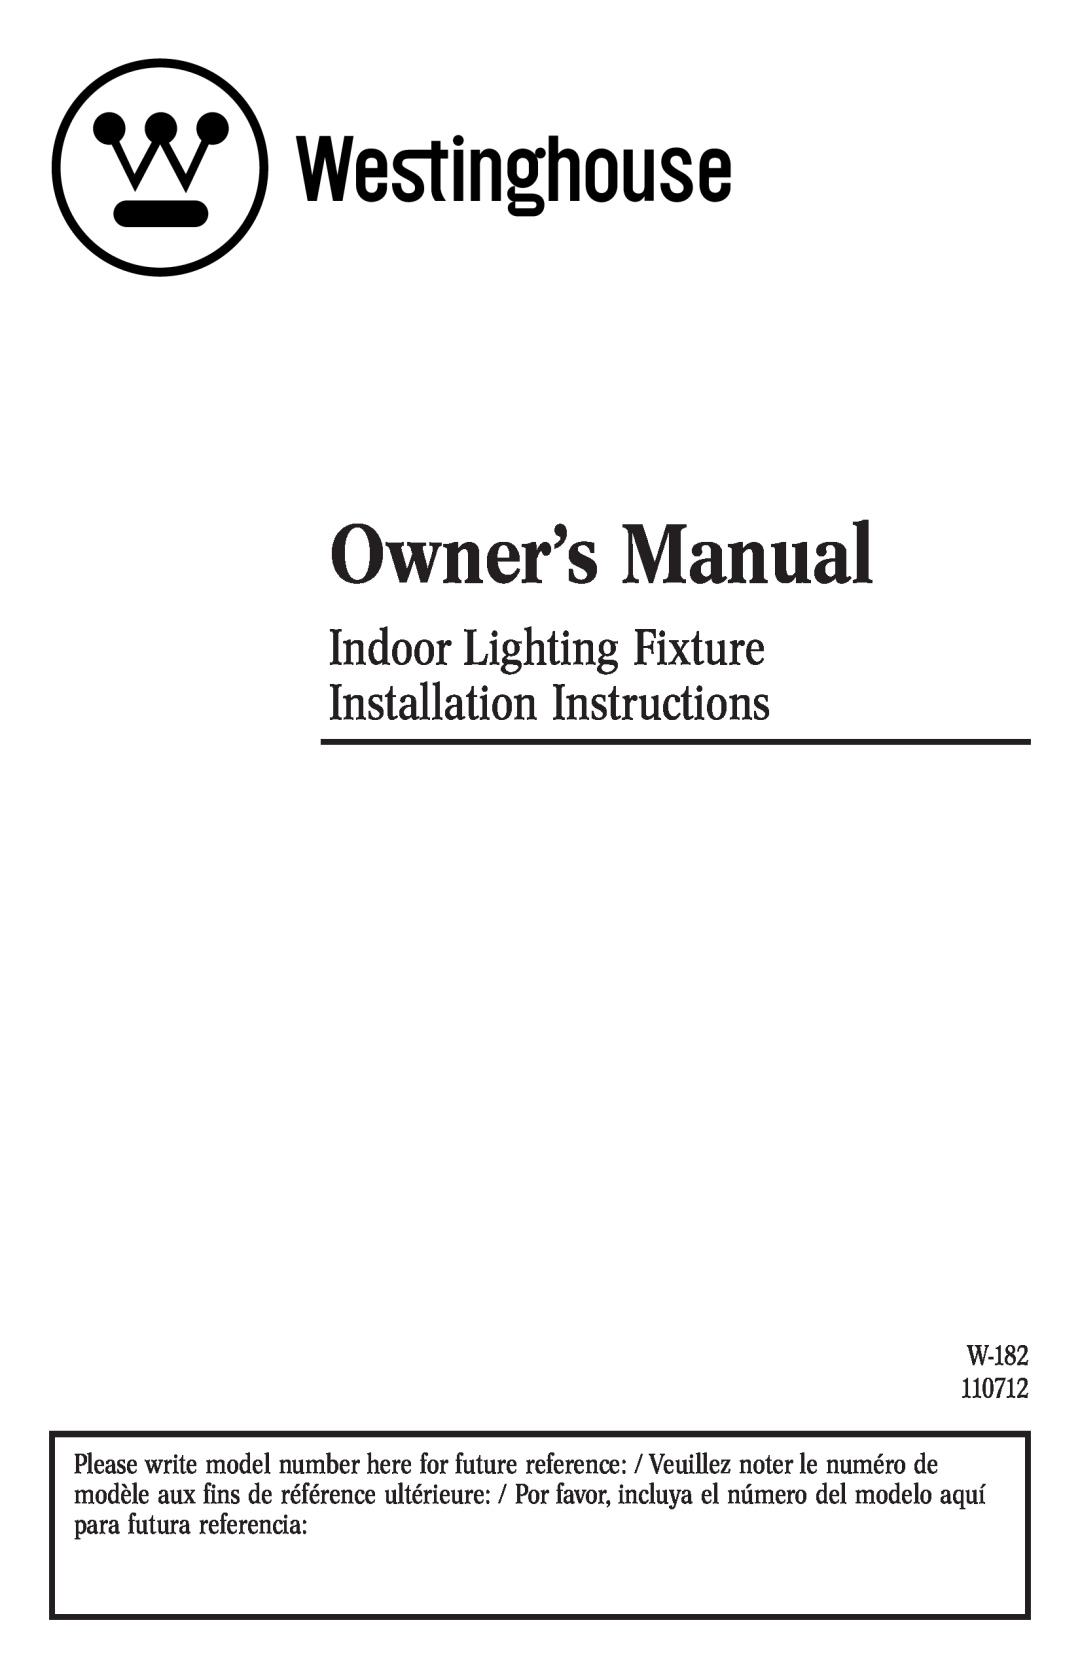 Westinghouse W-182 110712 owner manual Indoor Lighting Fixture Installation Instructions 